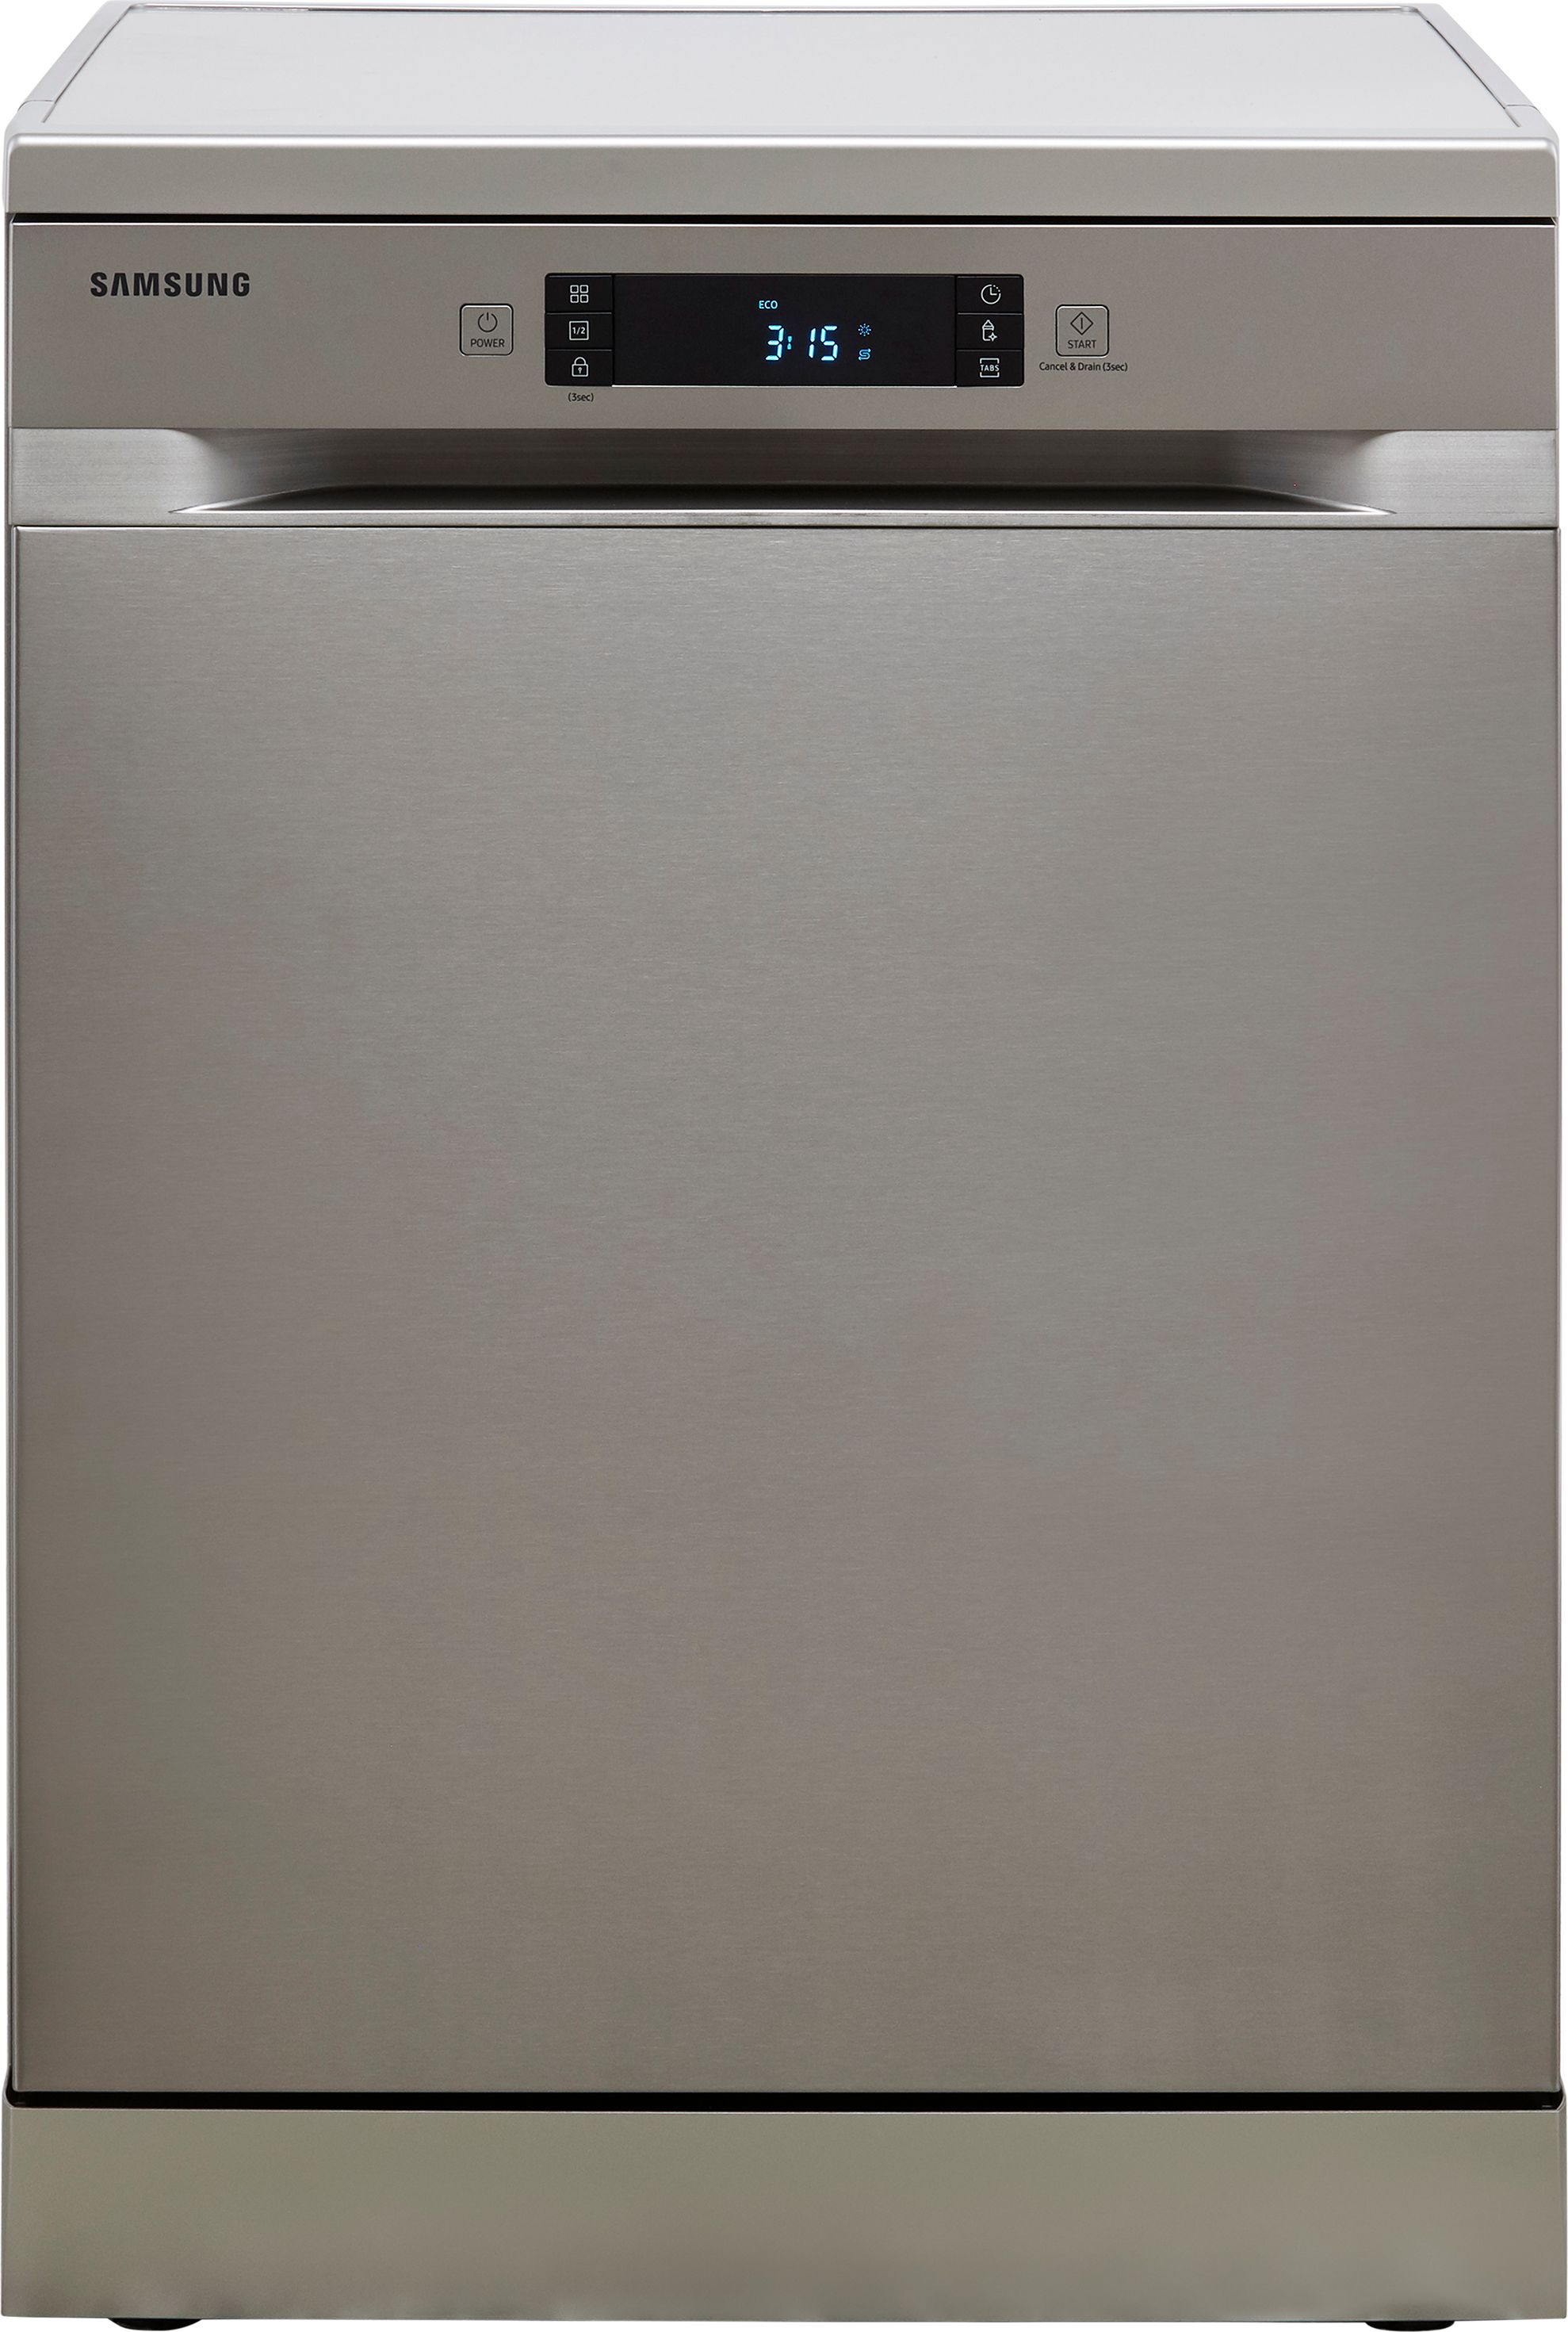 Samsung Series 5 DW60M5050FS Standard Dishwasher - Stainless Steel - F Rated, Stainless Steel